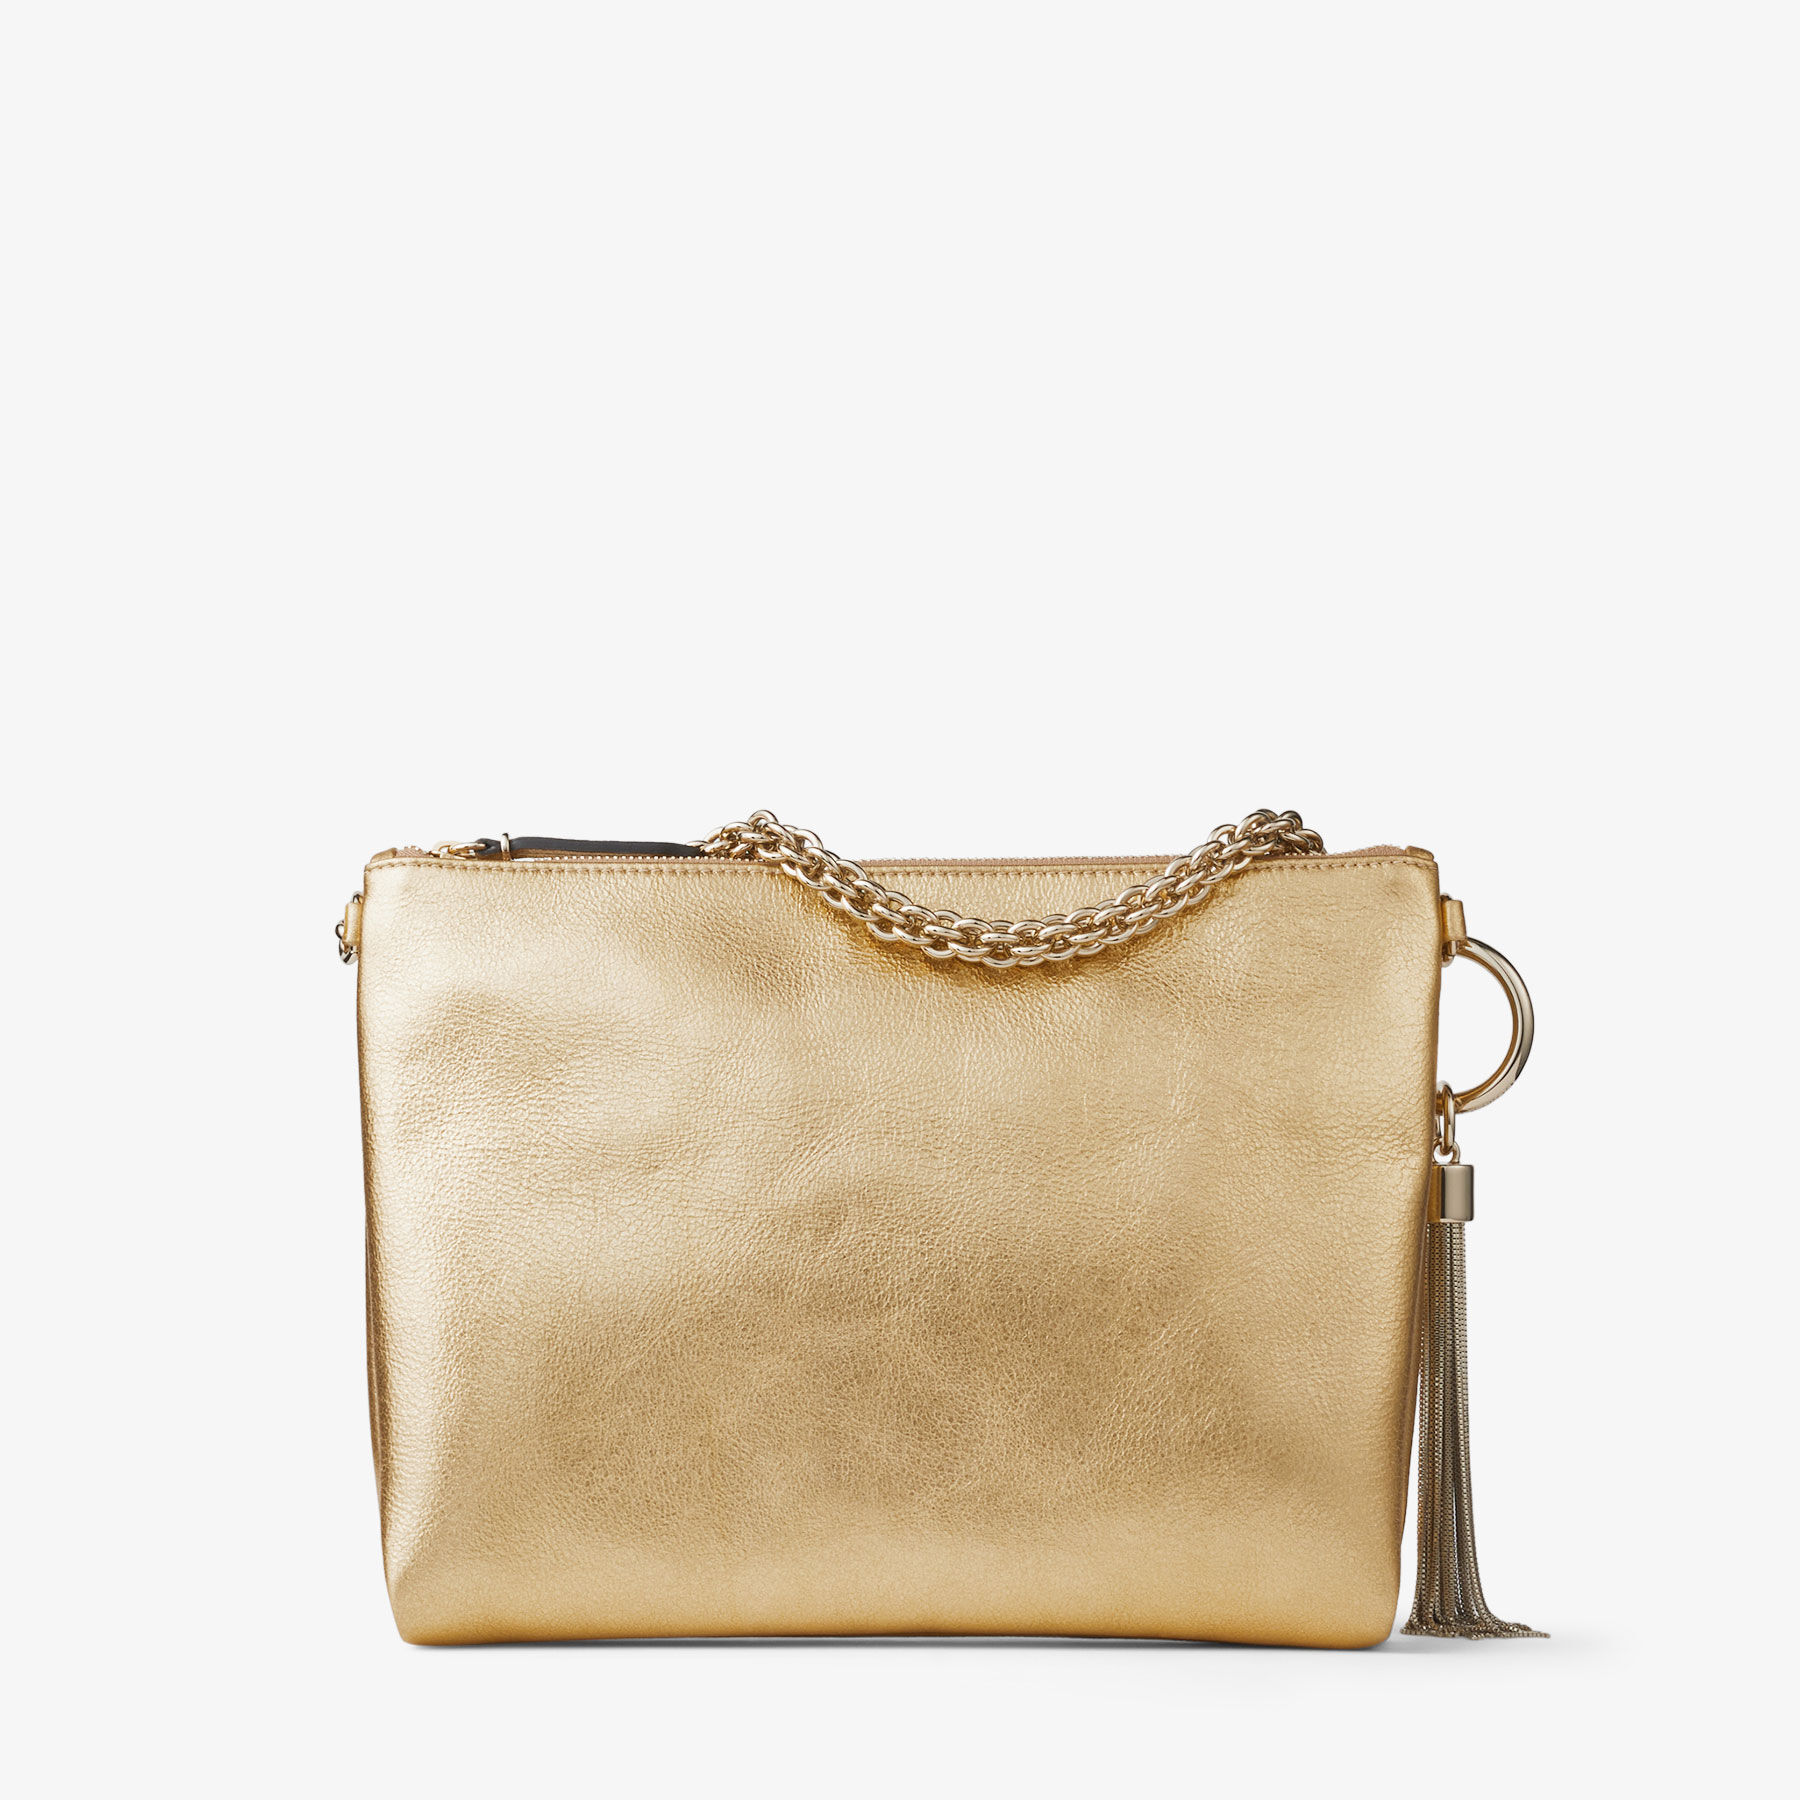 Gold Metallic Leather Clutch Bag With Chain Strap, CALLIE